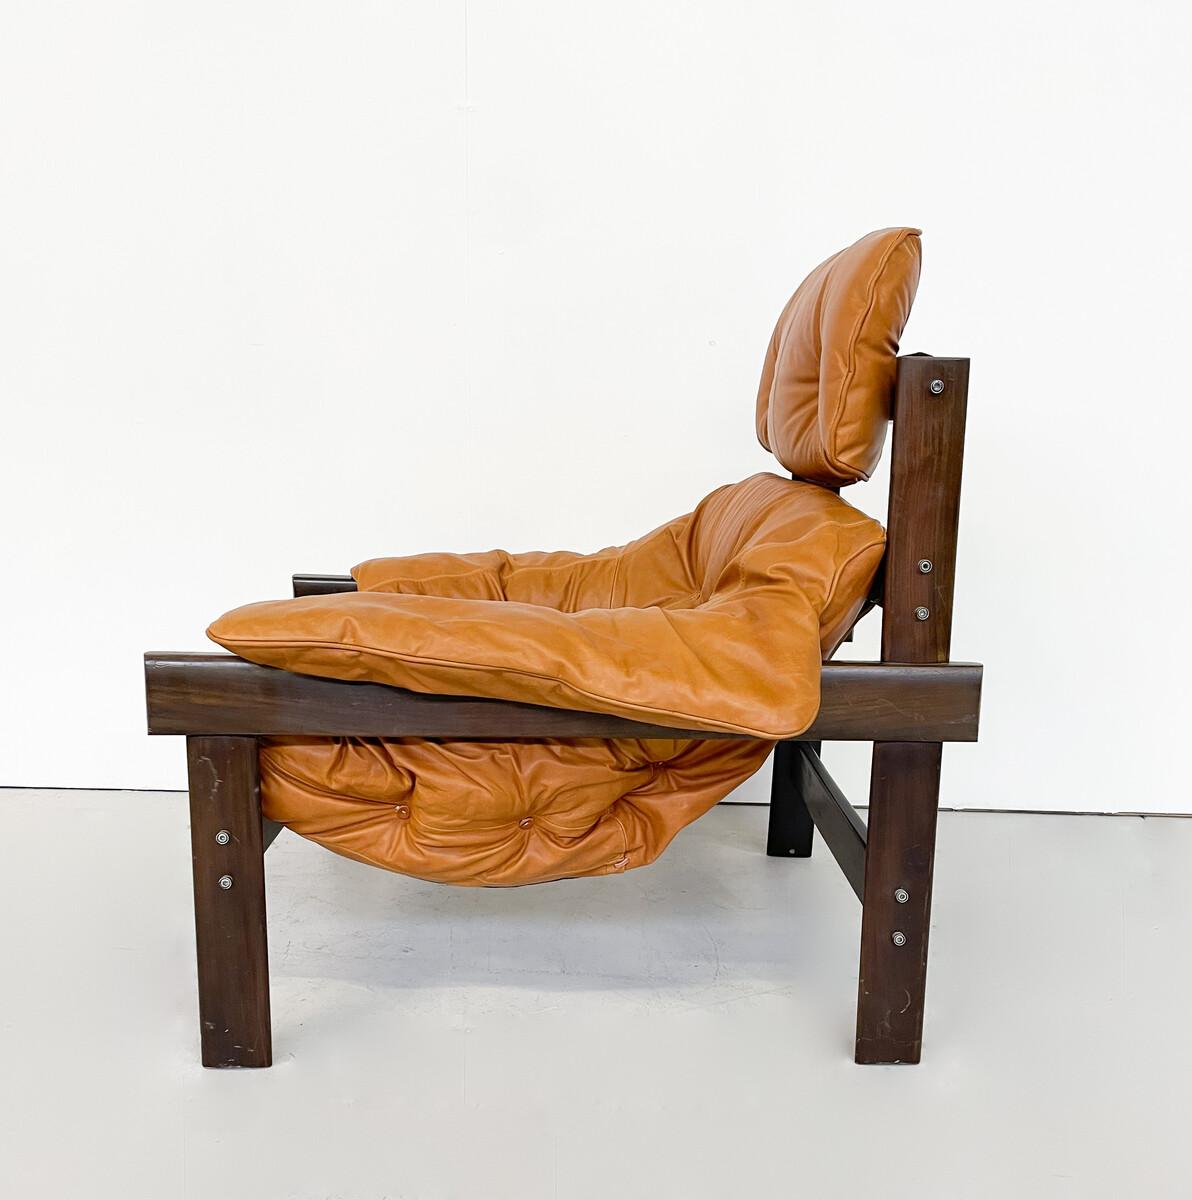 Mid-Century Modern Armchair by Percival Lafer for Lafer MP, Wood and Leather, Brazil, 1960s - New Leather Upholstery